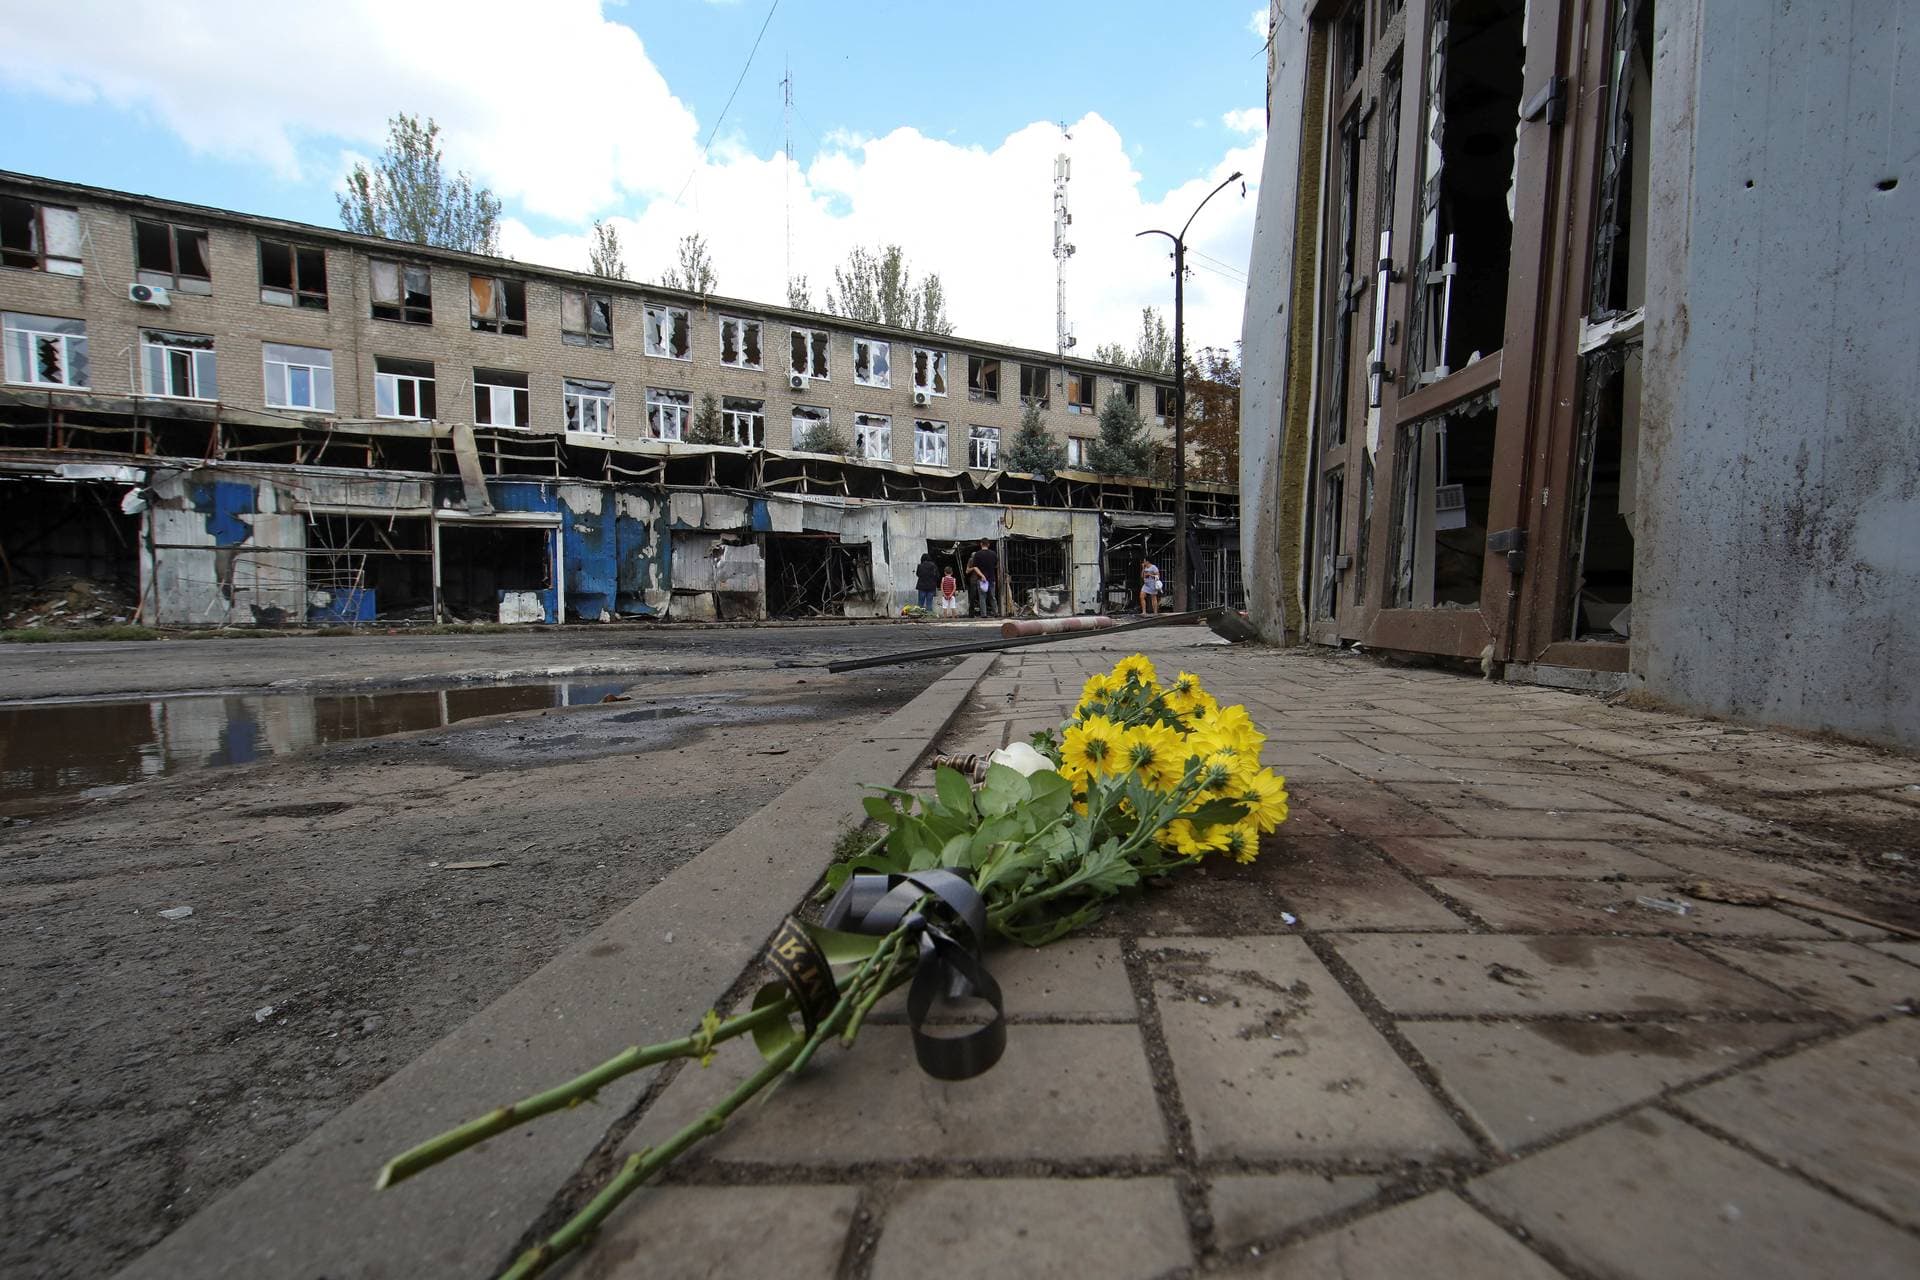 Flowers left by local residents to pay tribute to civilian people killed yesterday are seen at the strike site in Kostiantynivka